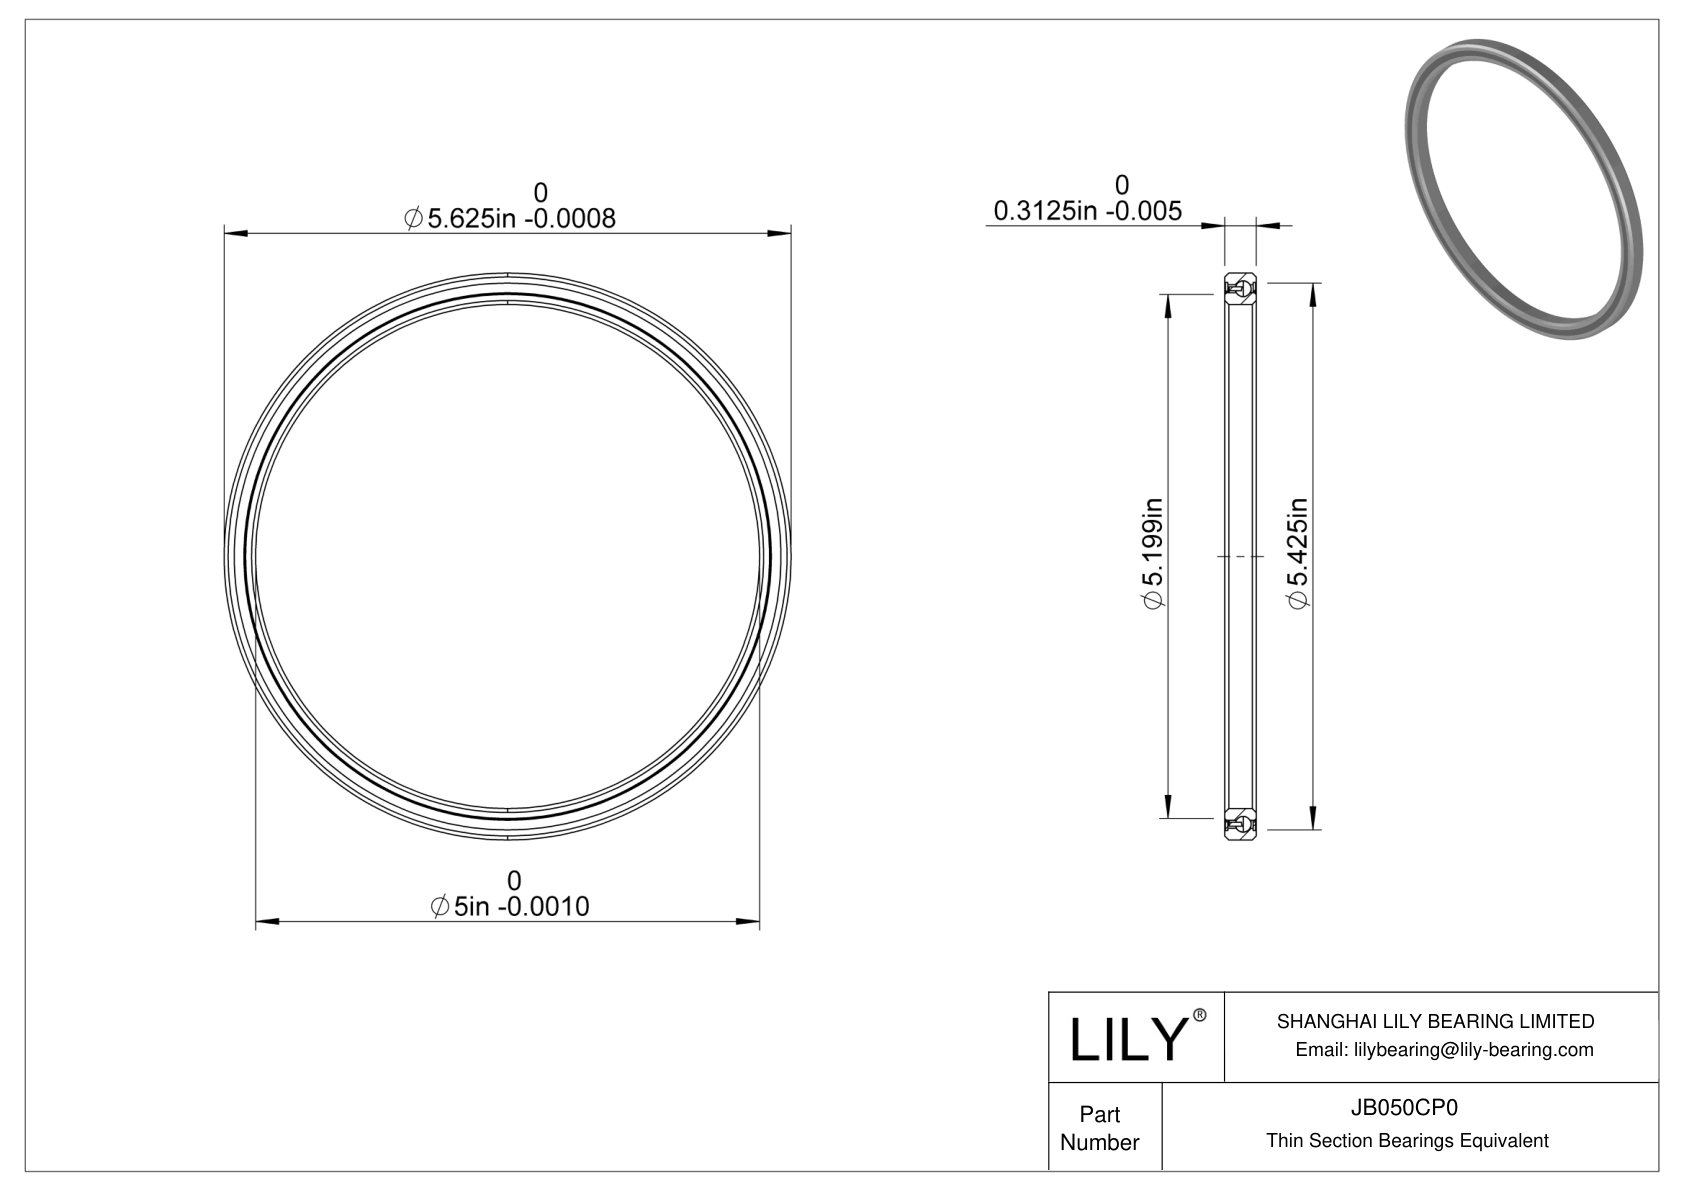 JB050CP0 Constant Section (CS) Bearings cad drawing